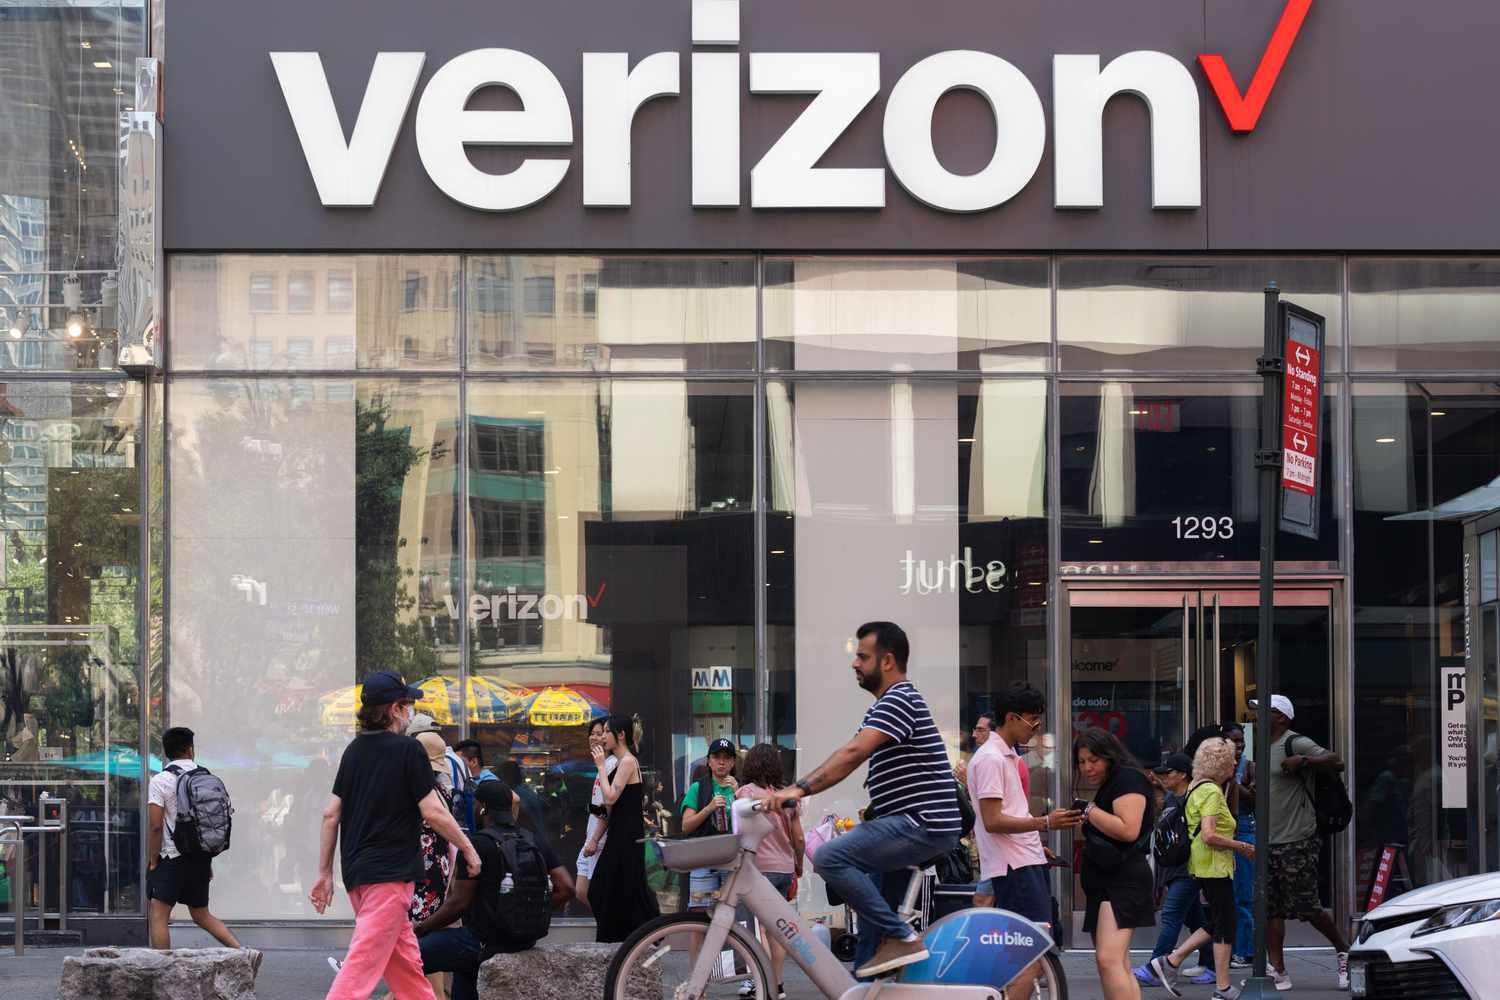 What You Need To Know Ahead of Verizon’s Earnings Report Monday [Video]